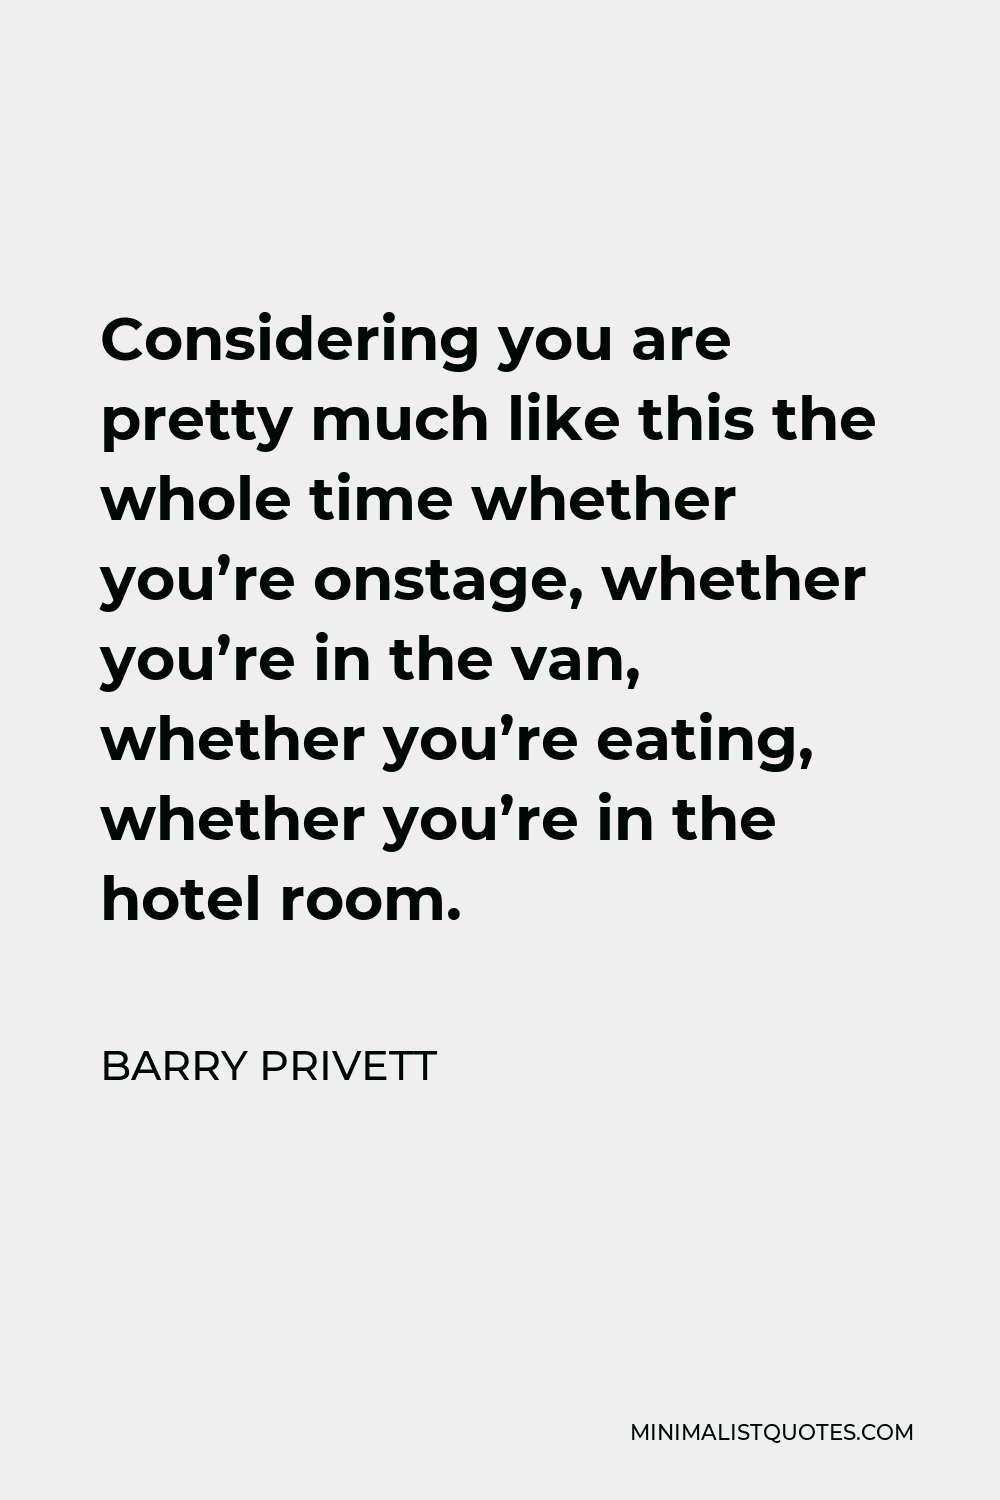 Barry Privett Quote - Considering you are pretty much like this the whole time whether you’re onstage, whether you’re in the van, whether you’re eating, whether you’re in the hotel room.